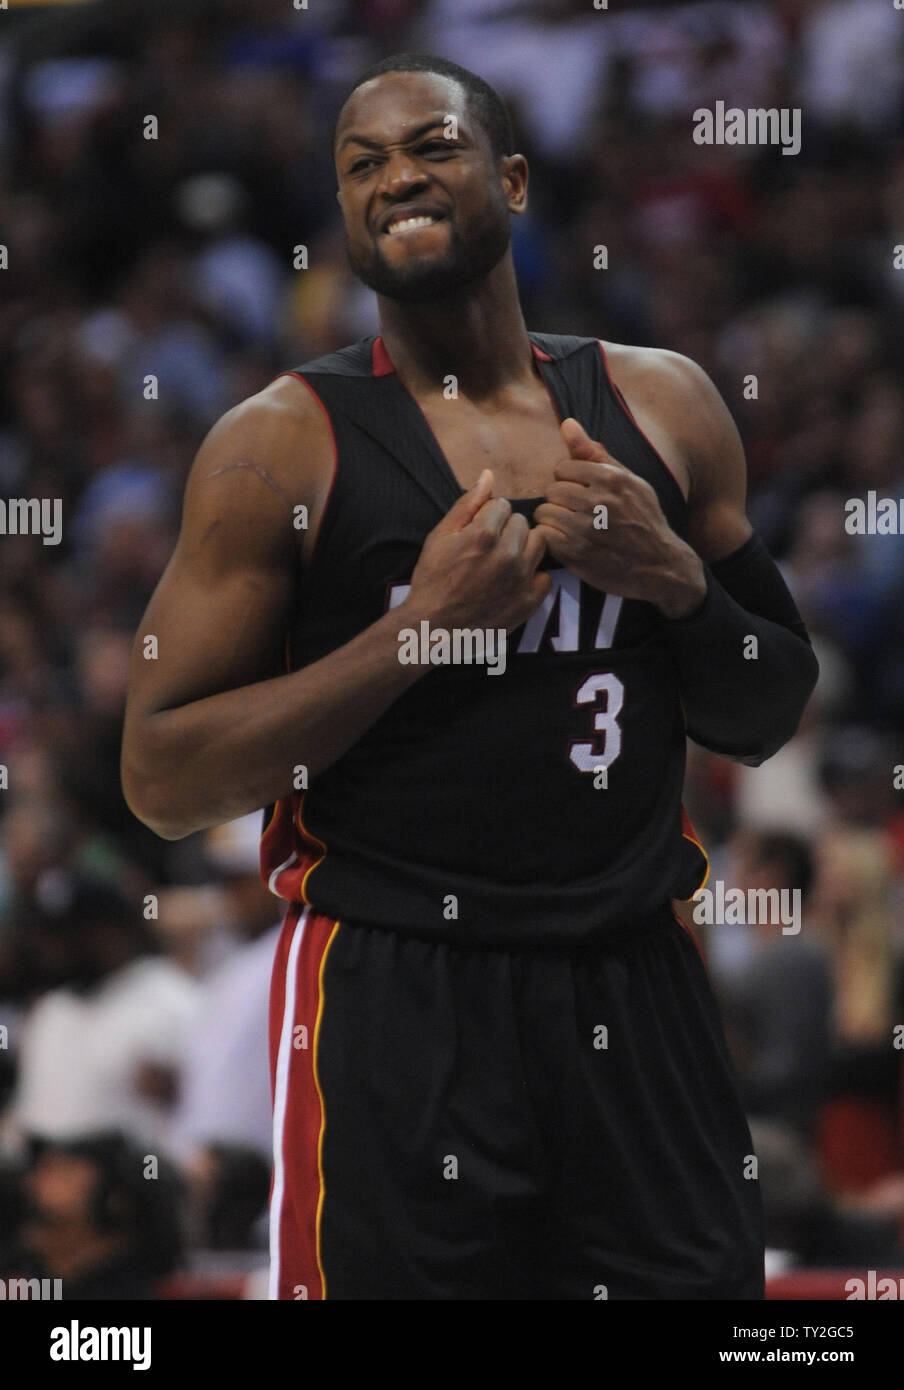 Miami Heat shooting guard Dwyane Wade (3) reacts to a refs call against the Los Angeles Clippers in the second half of  their NBA basketball game in Los Angeles on January 11, 2012.  The Clippers won 95-89.  UPI/Lori Shepler Stock Photo